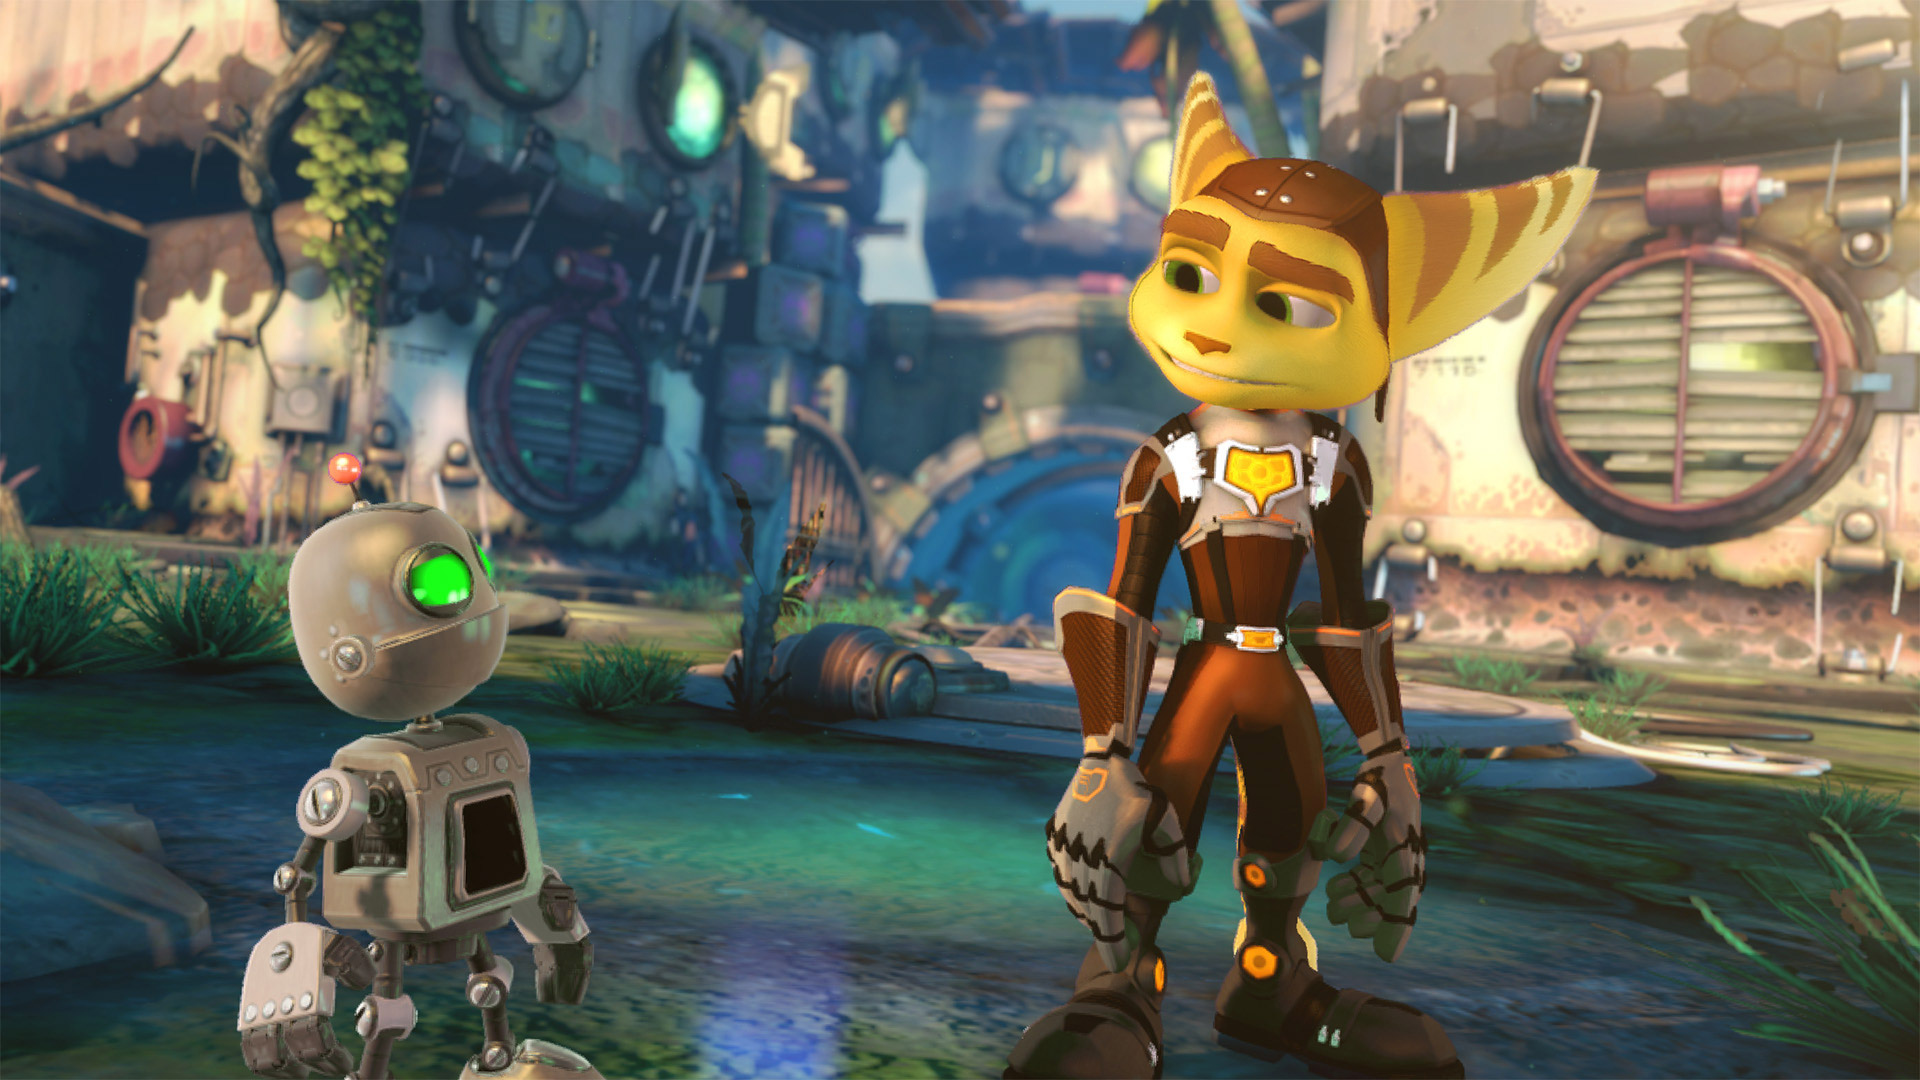 Ratchet & Clank Pics, Video Game Collection